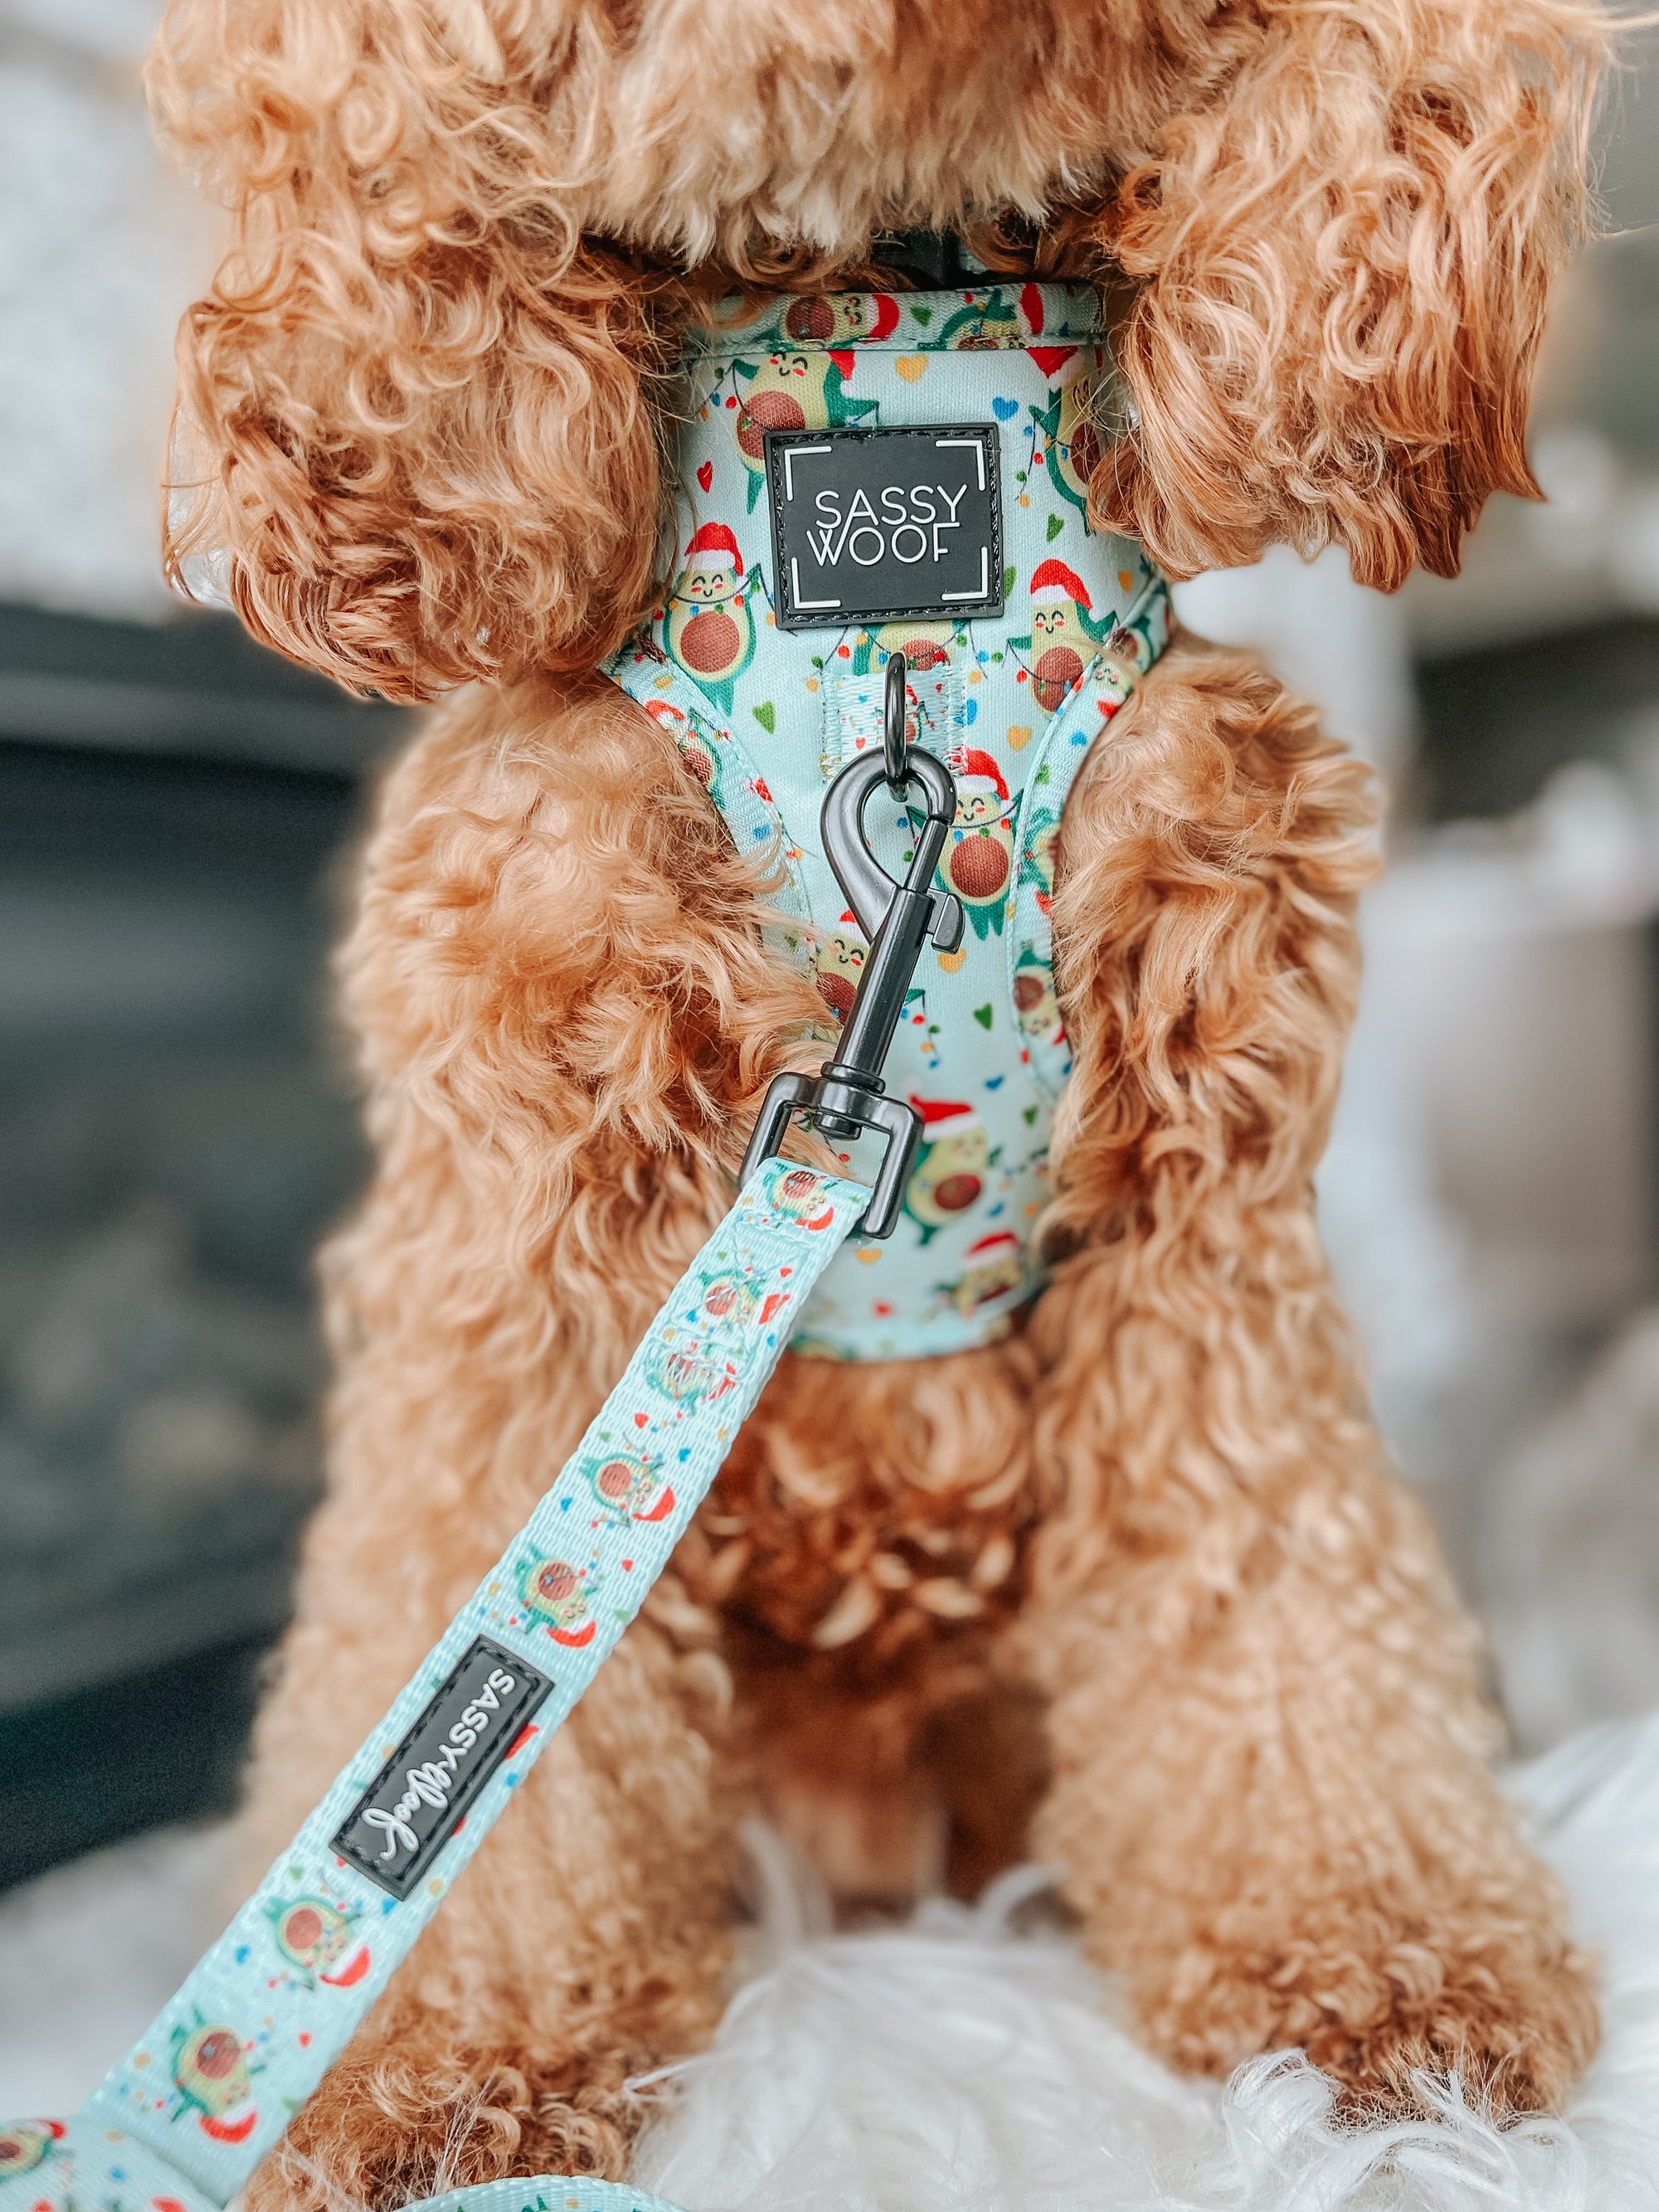 INFLUENCER_CONTENT | @GEORGIE.THECAVAPOO | SIZE S